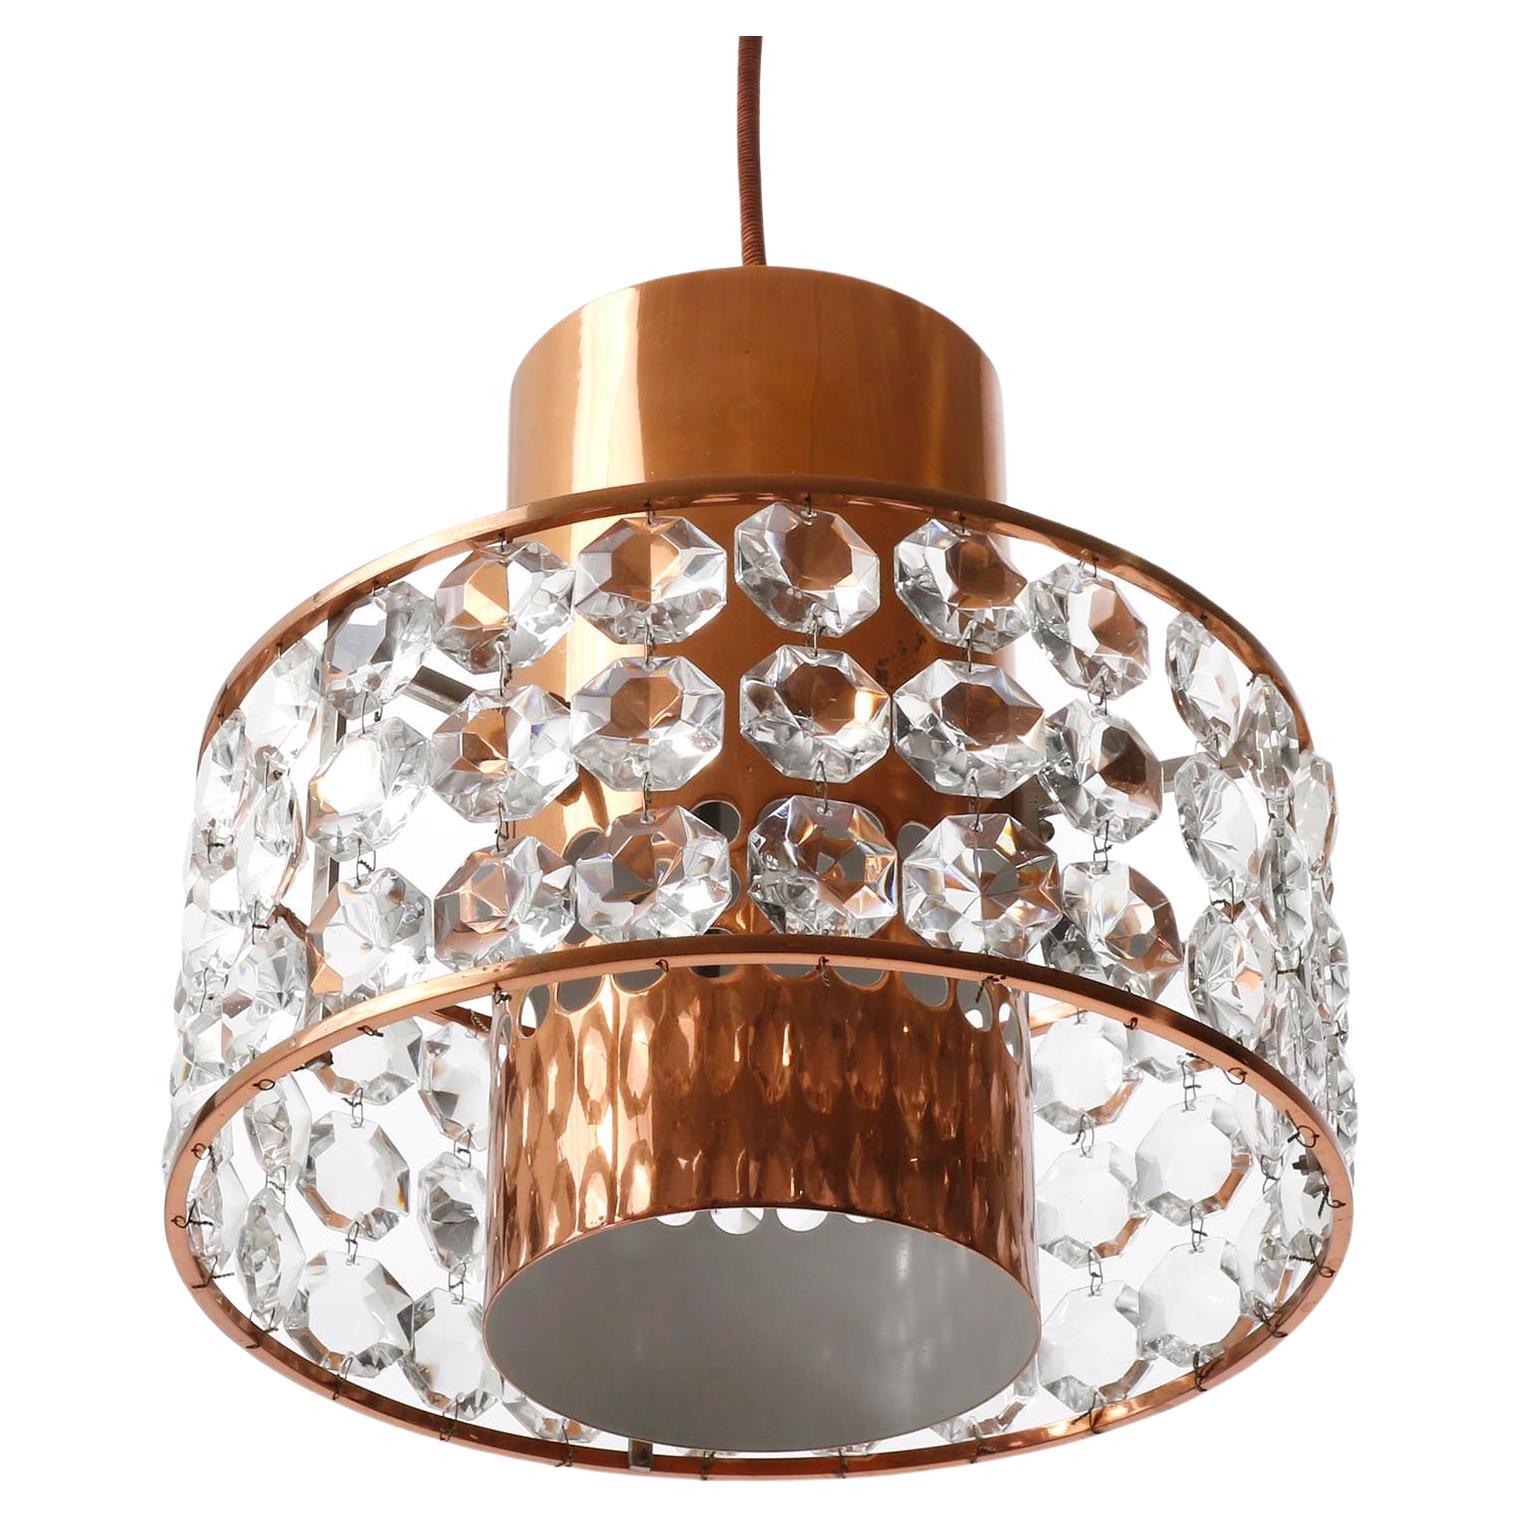 Bakalowits Pendant Light Lantern, Copper Nickel Crystal Glass, 1960s, 1 of 3 In Good Condition For Sale In Hausmannstätten, AT